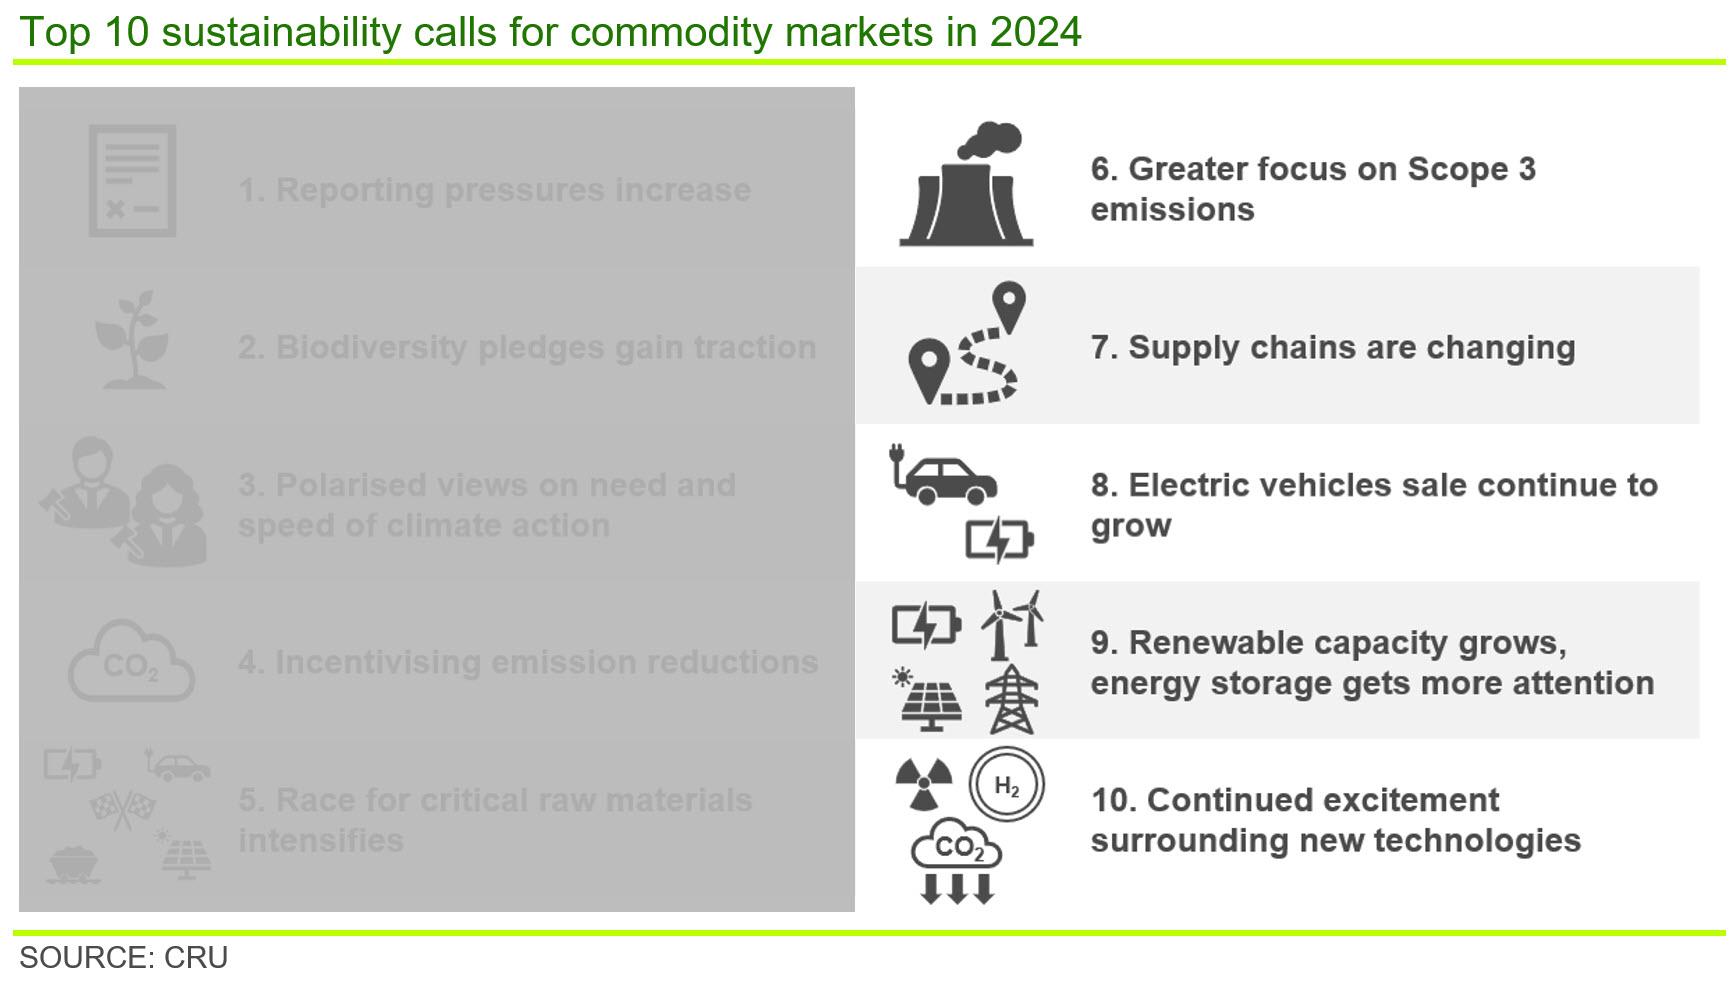 Part two of the top 10 sustainability calls for commodity markets in 2024